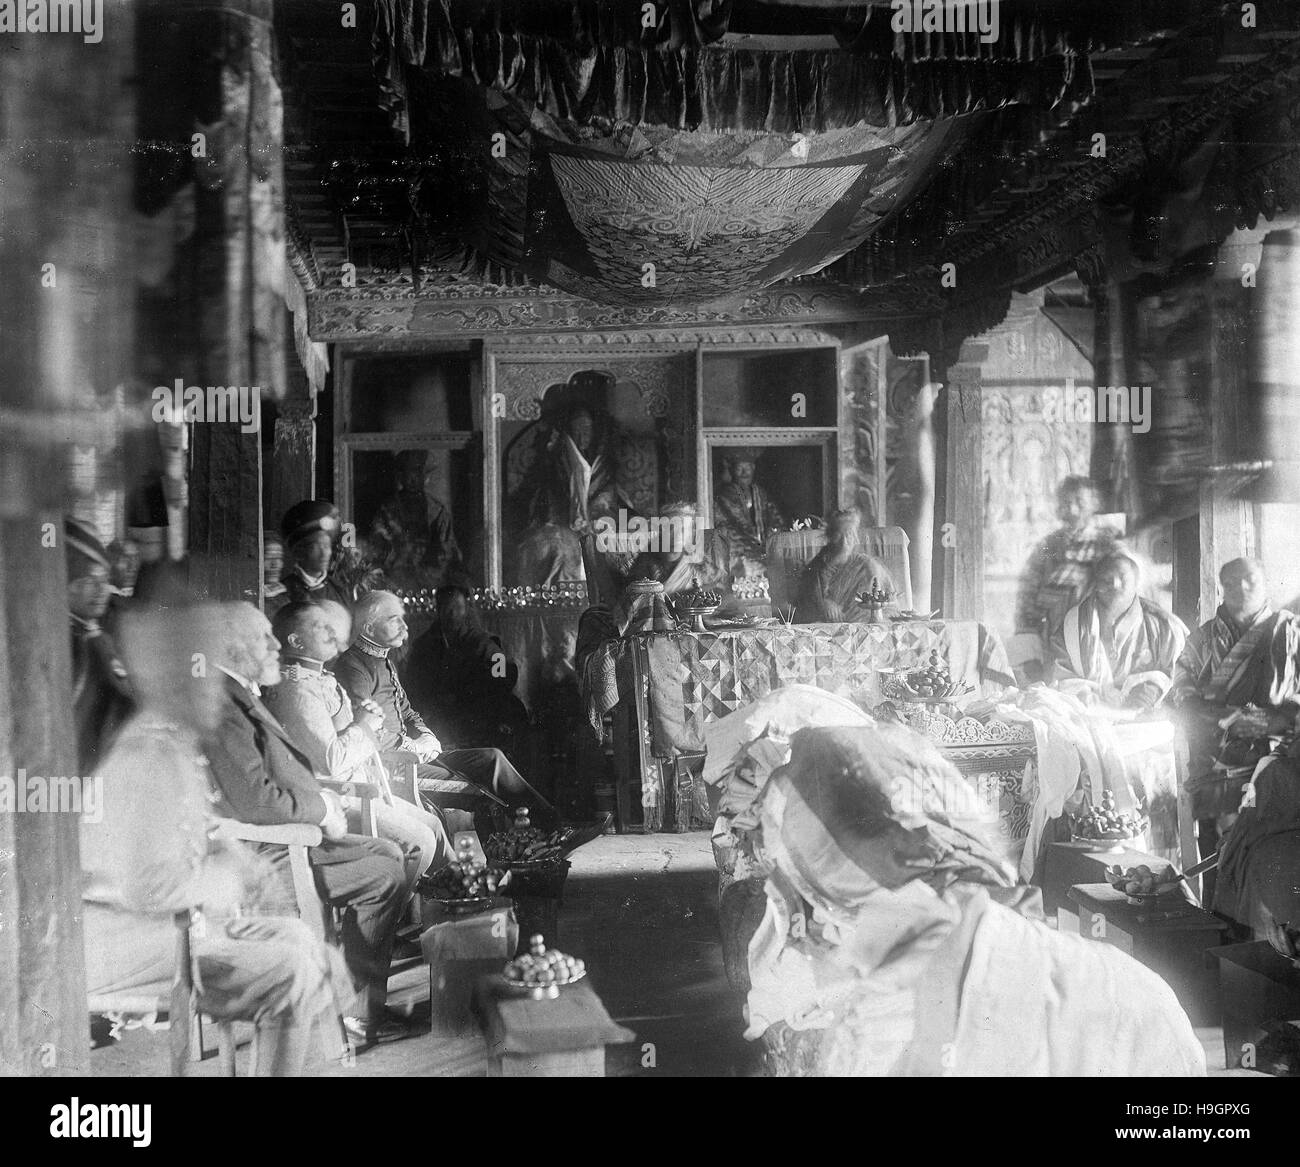 BHUTAN KING UGYEN WANGCHUCK (1862-1926) receiving the Order of Knight Commander of the Order of the British Empire from British officials at Punakha Dzong in January 1905. John Claude White fourth from left with prominent moustache also took the photo by a time lapse. Photo: British Library Stock Photo